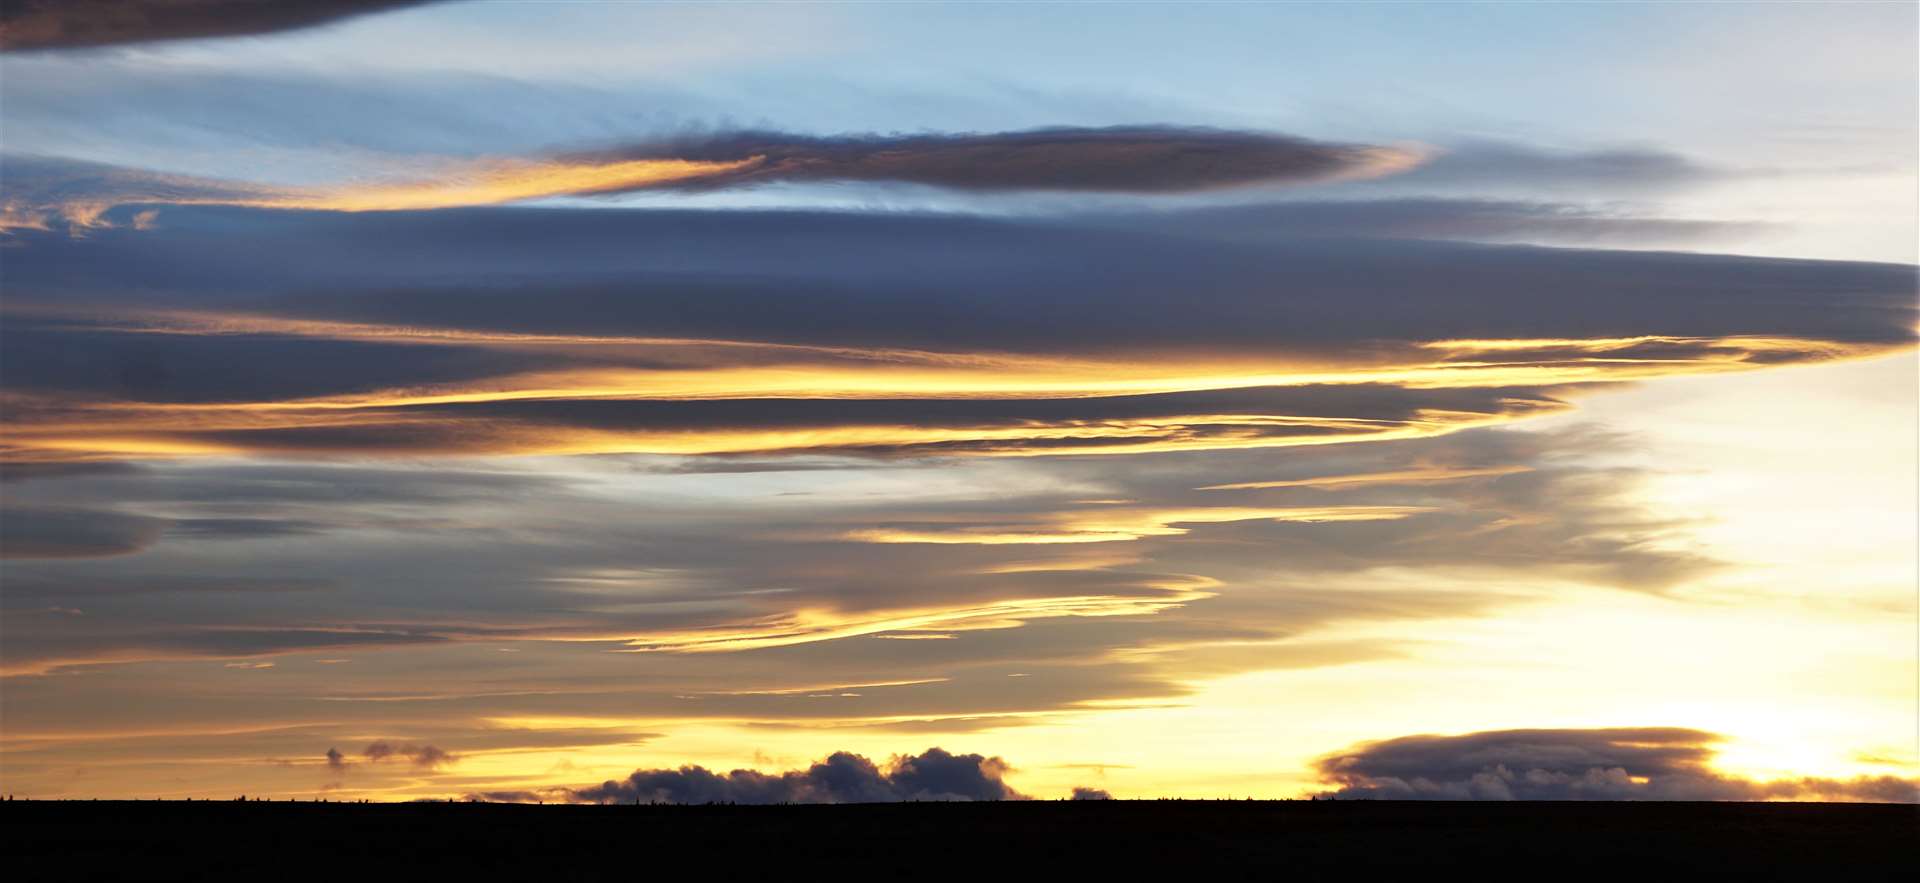 Lenticular clouds over the Caithness moors yesterday afternoon.. Pictures: DGS